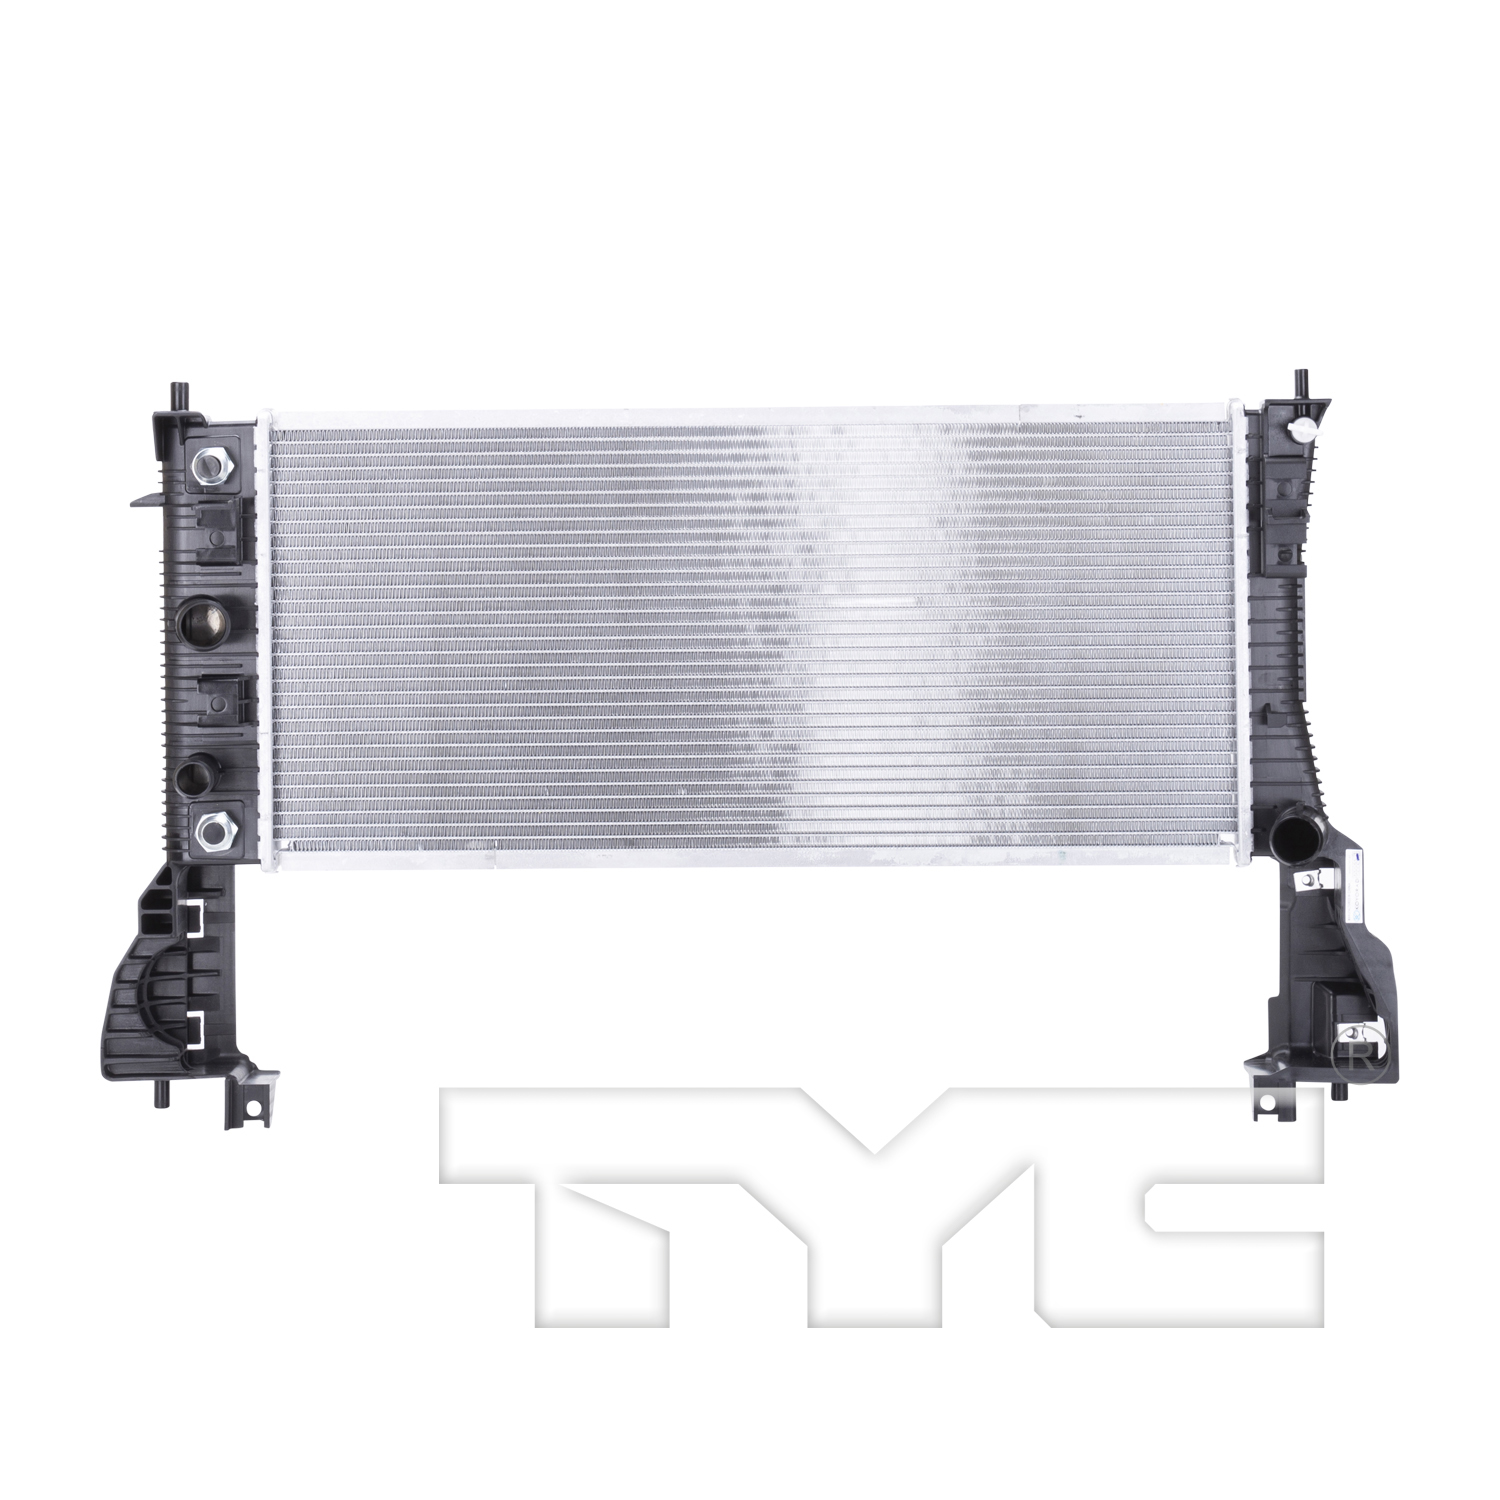 Aftermarket RADIATORS for FORD - EDGE, EDGE,12-14,Radiator assembly